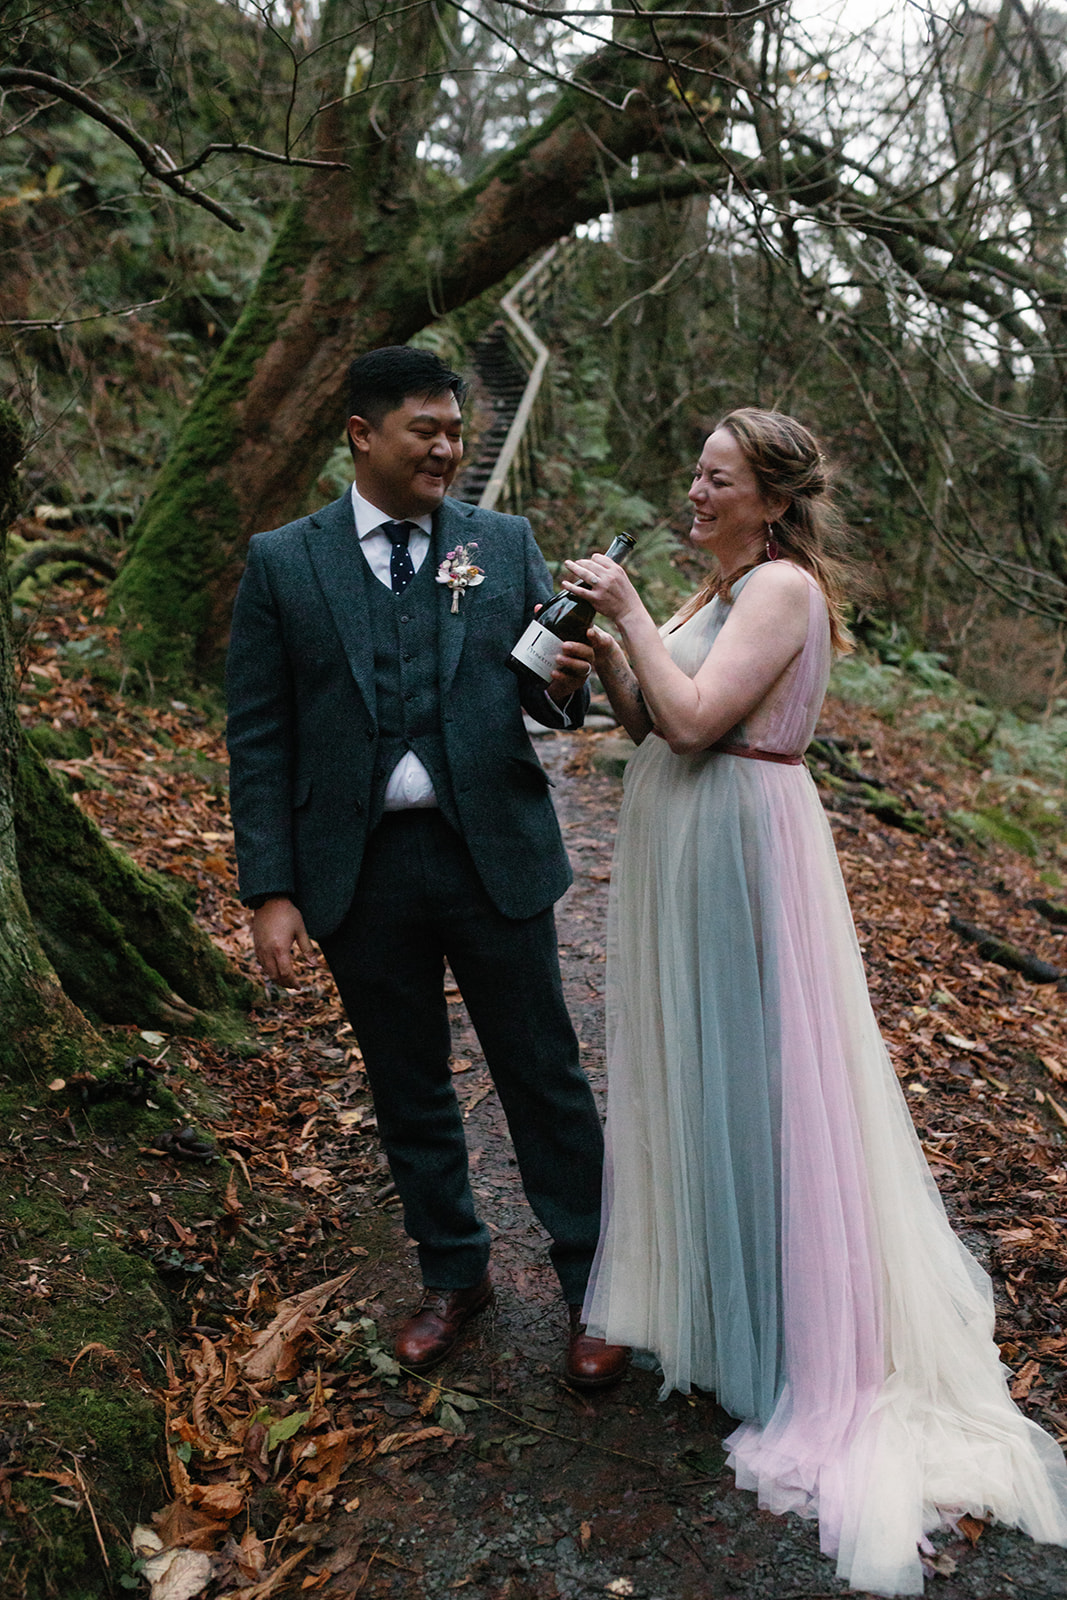 Newlyweds Mellie and Andrew celebrate their elopement on the picturesque Isle of Skye, popping a bottle of champagne